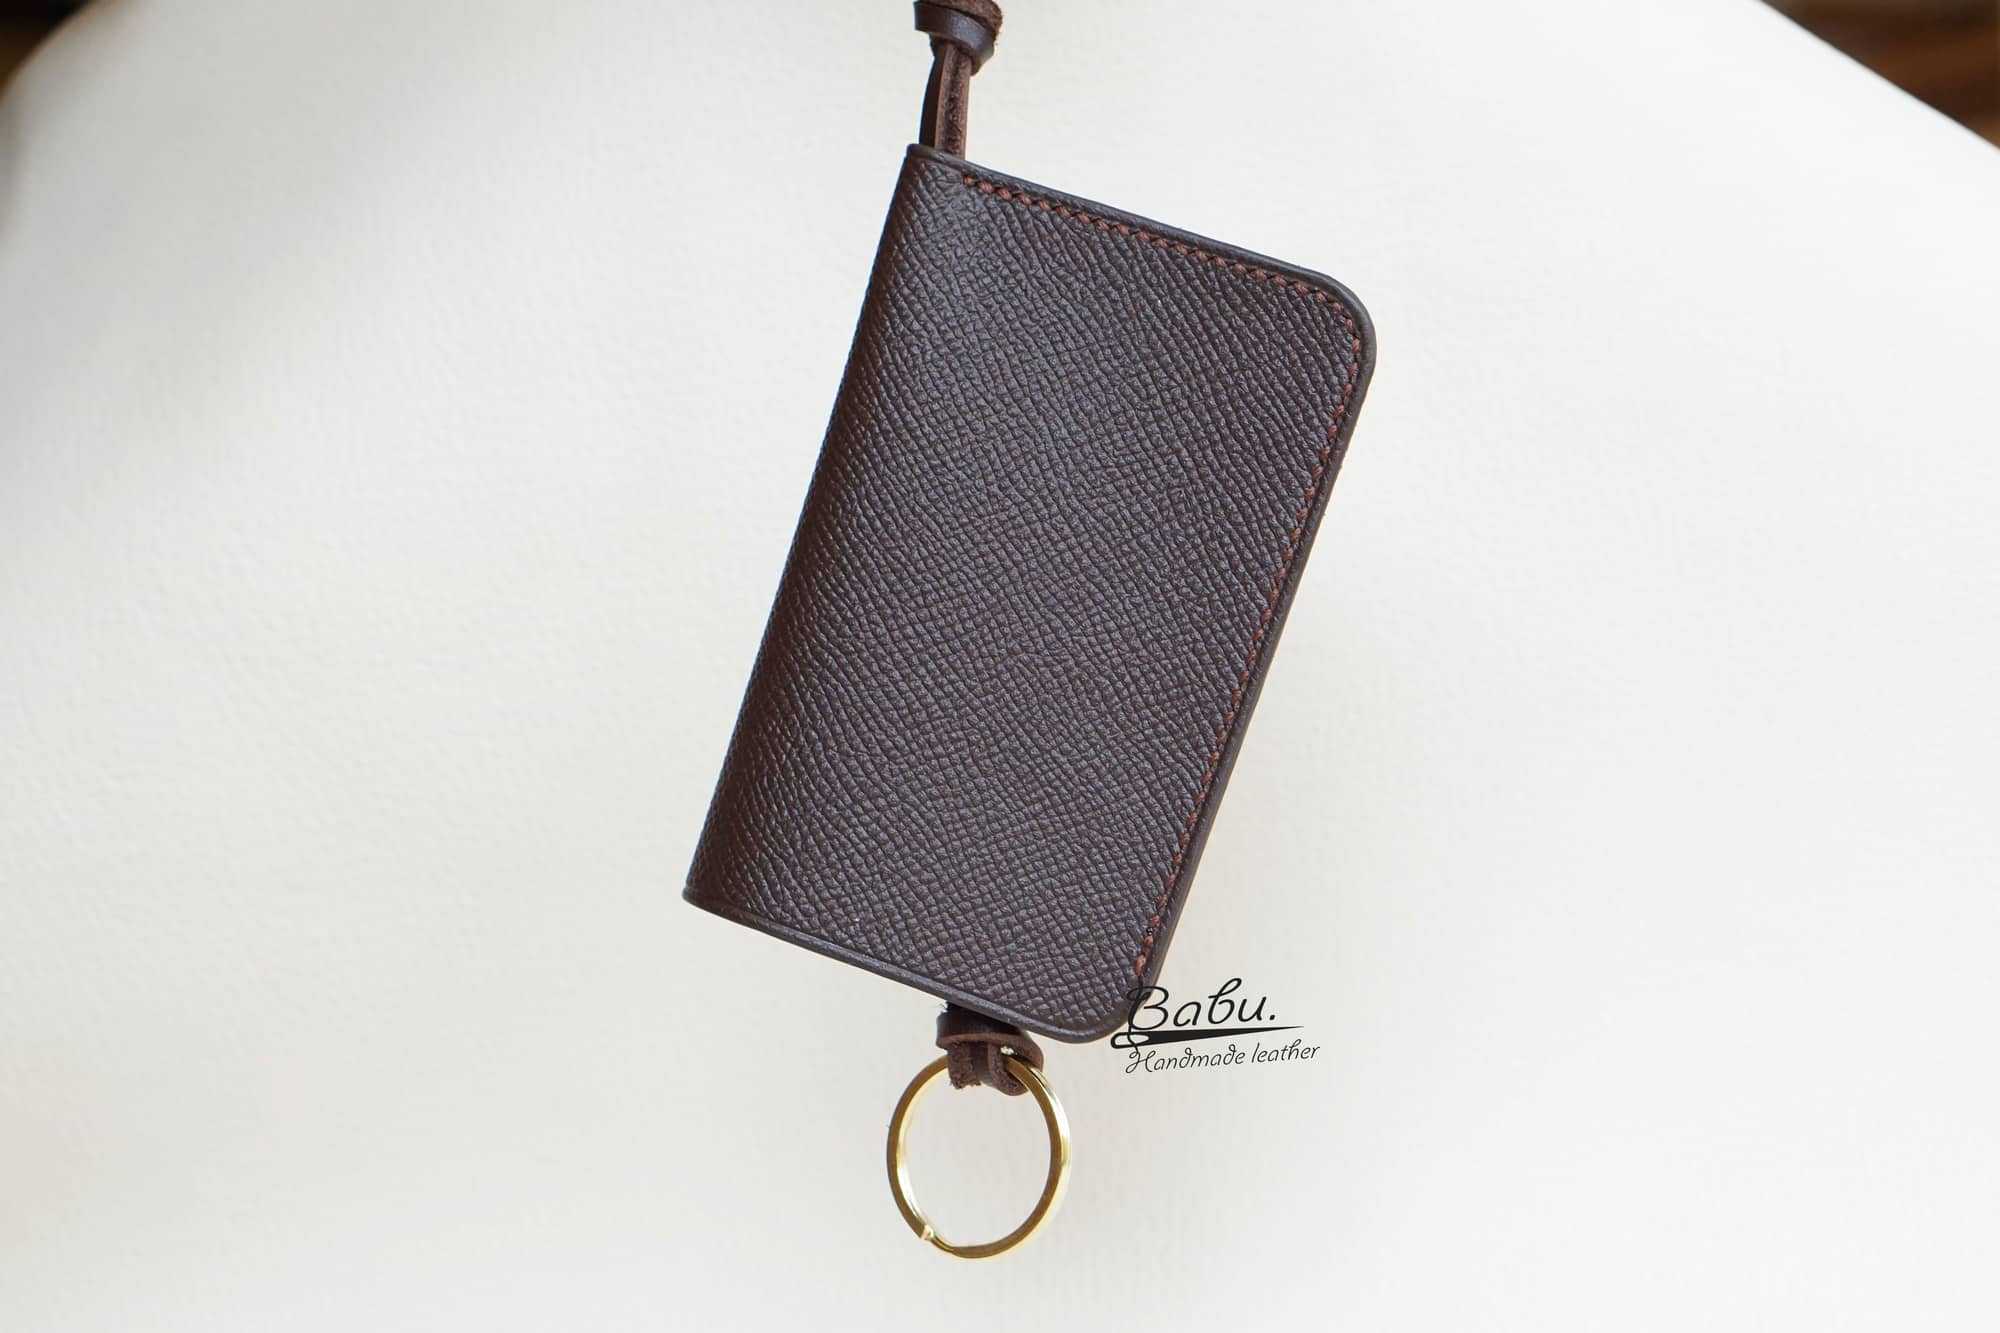 Key Holder | White Saffiano | Key Case | Pouch | Embossed | Customized | Personalized Handmade Leather | Made to Order